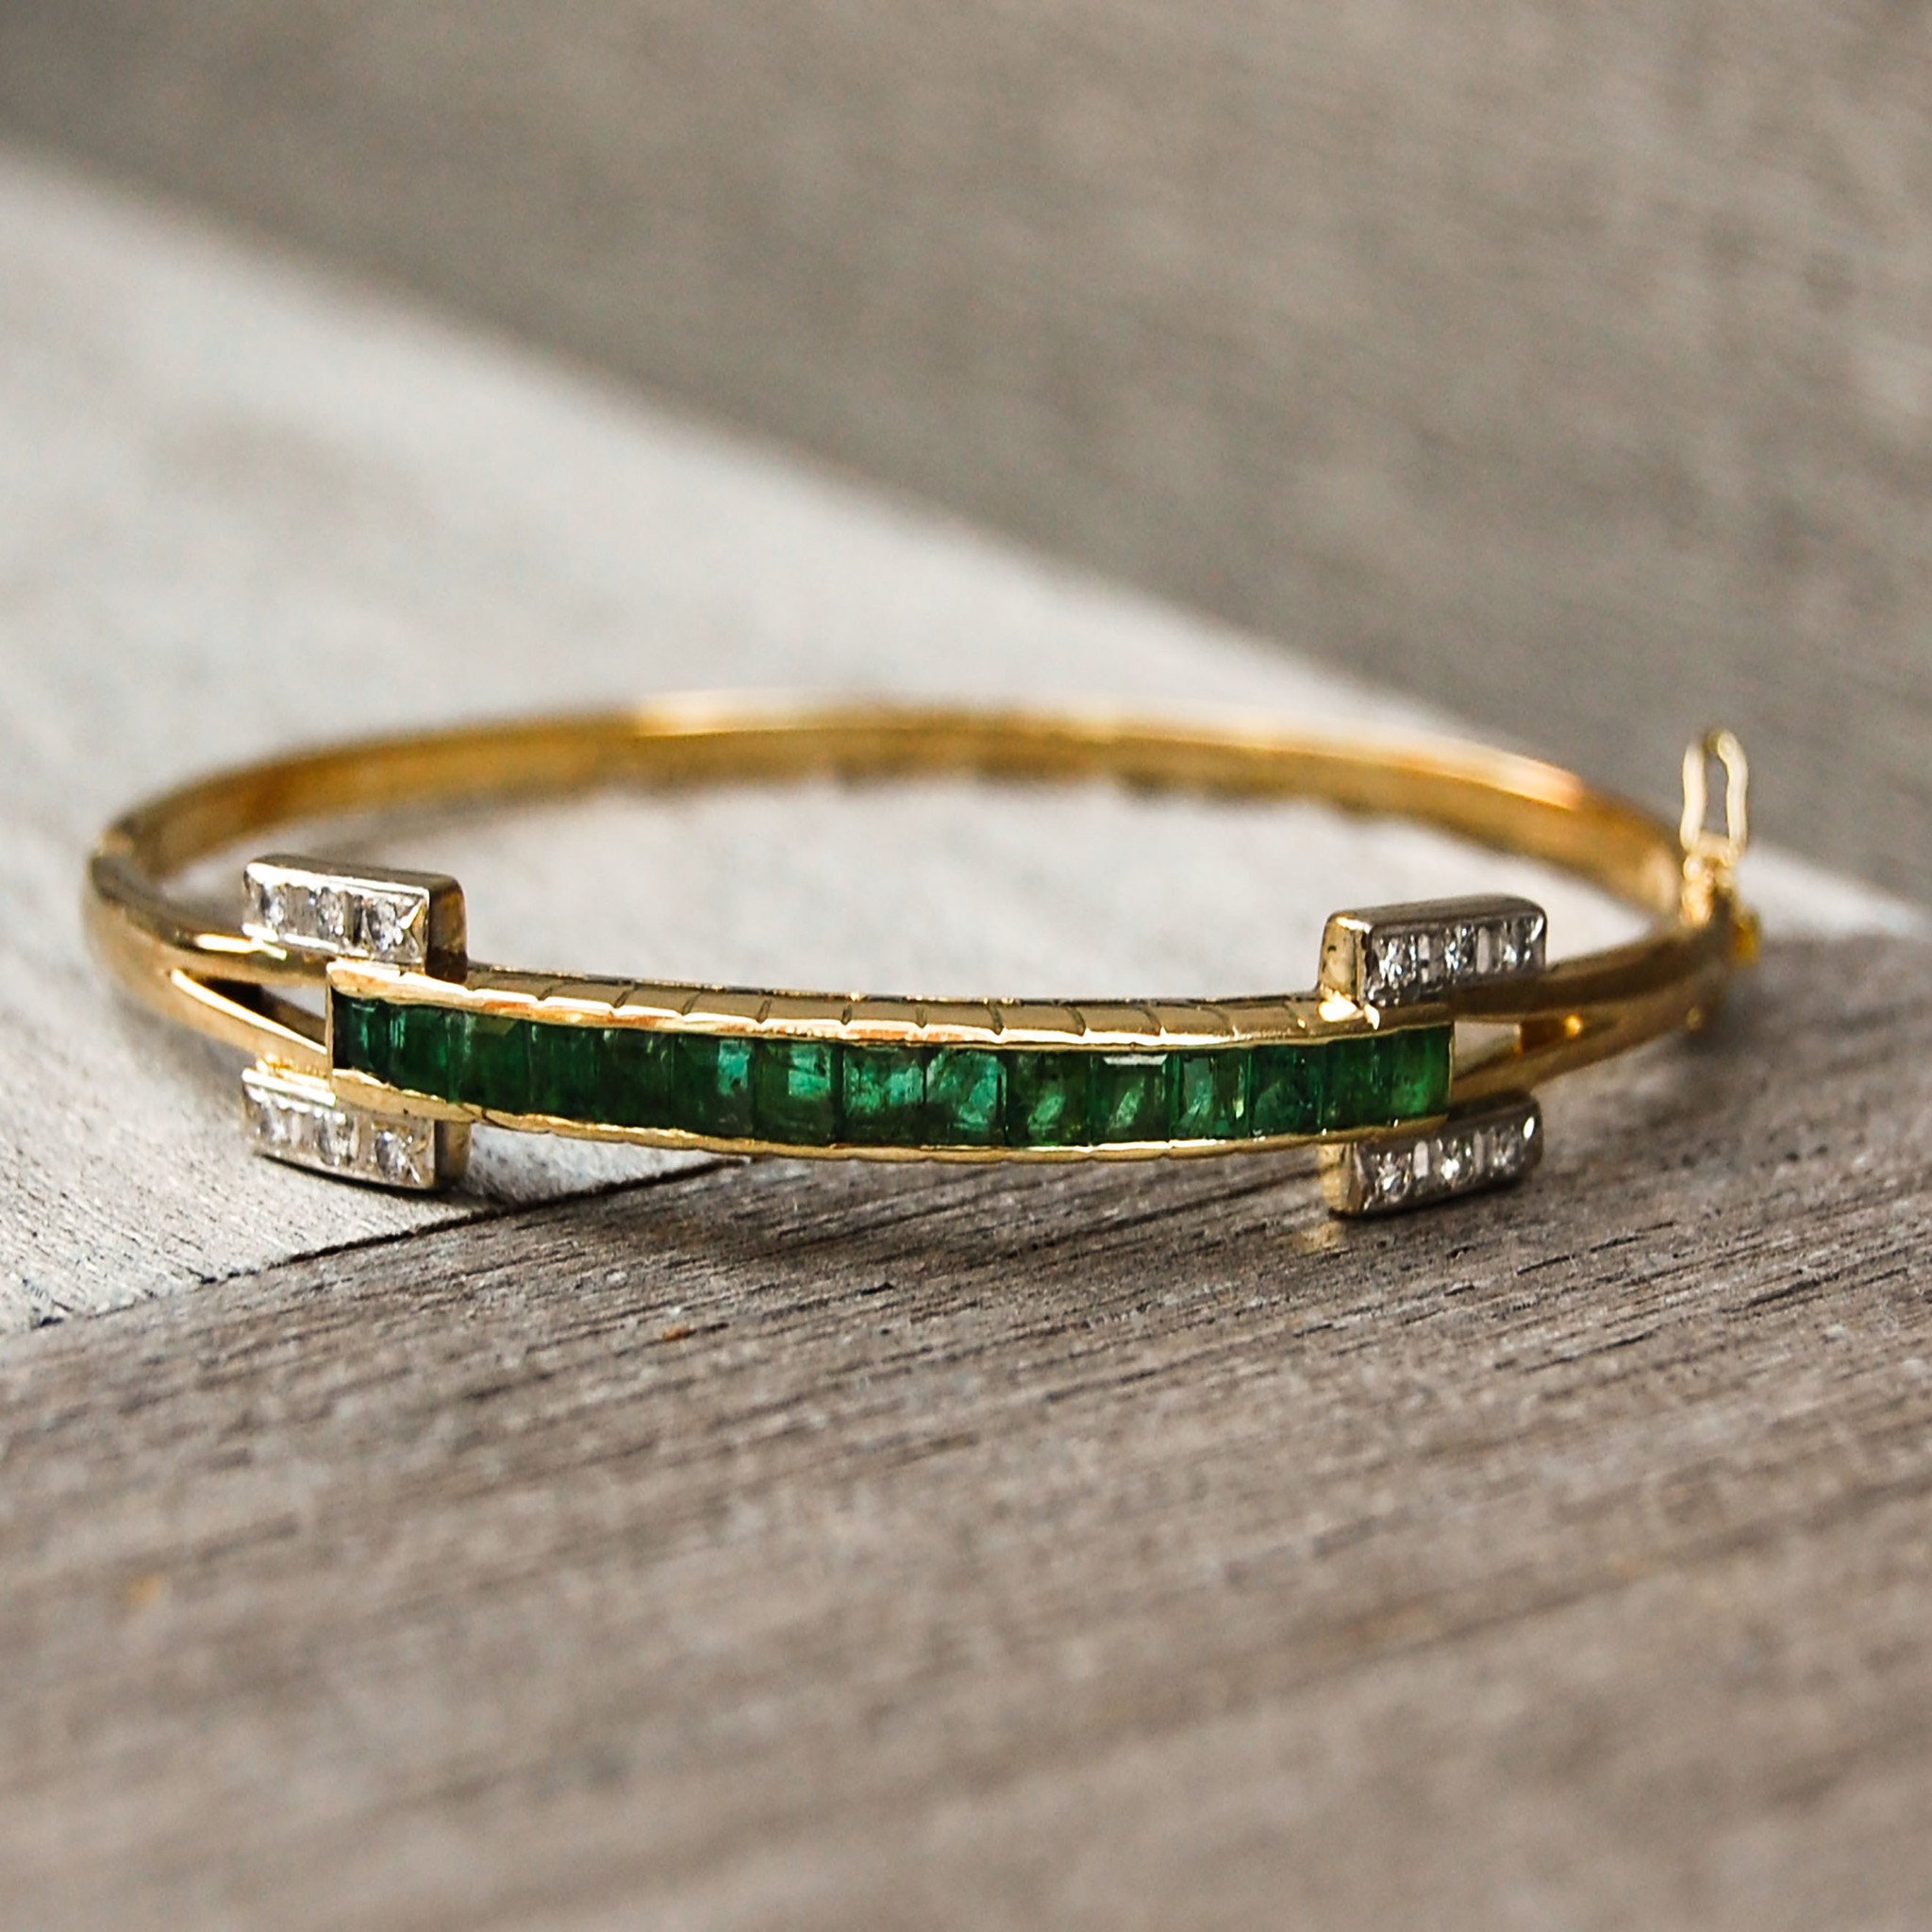 Vintage Gold Bangle with Emerald and Diamond Embellishment — Lifestyle with  Lynn